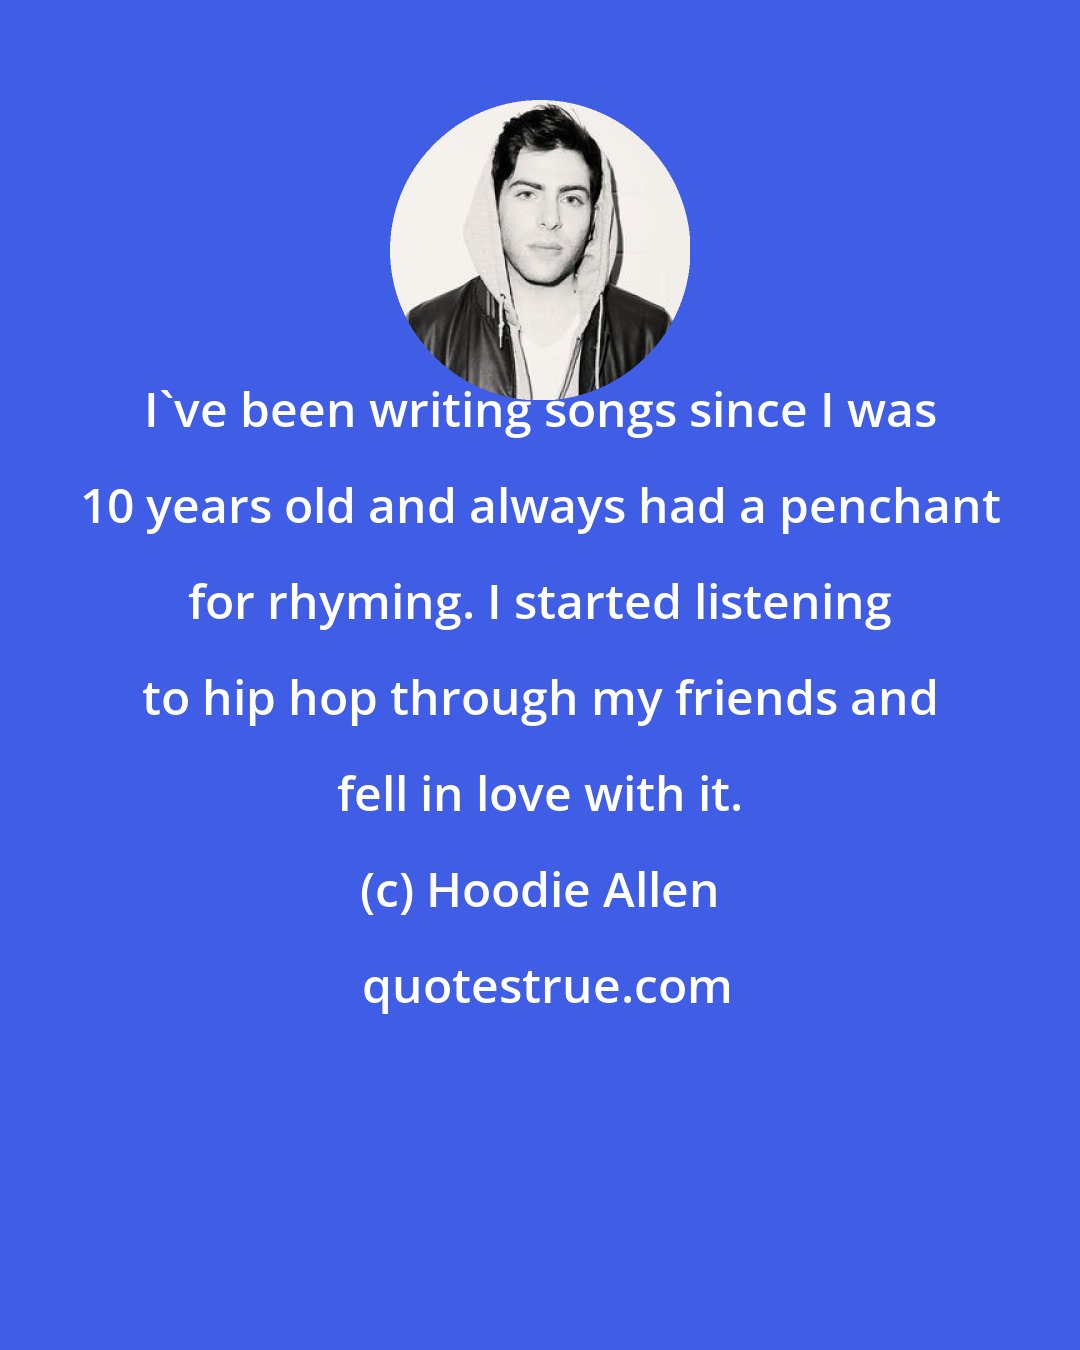 Hoodie Allen: I've been writing songs since I was 10 years old and always had a penchant for rhyming. I started listening to hip hop through my friends and fell in love with it.